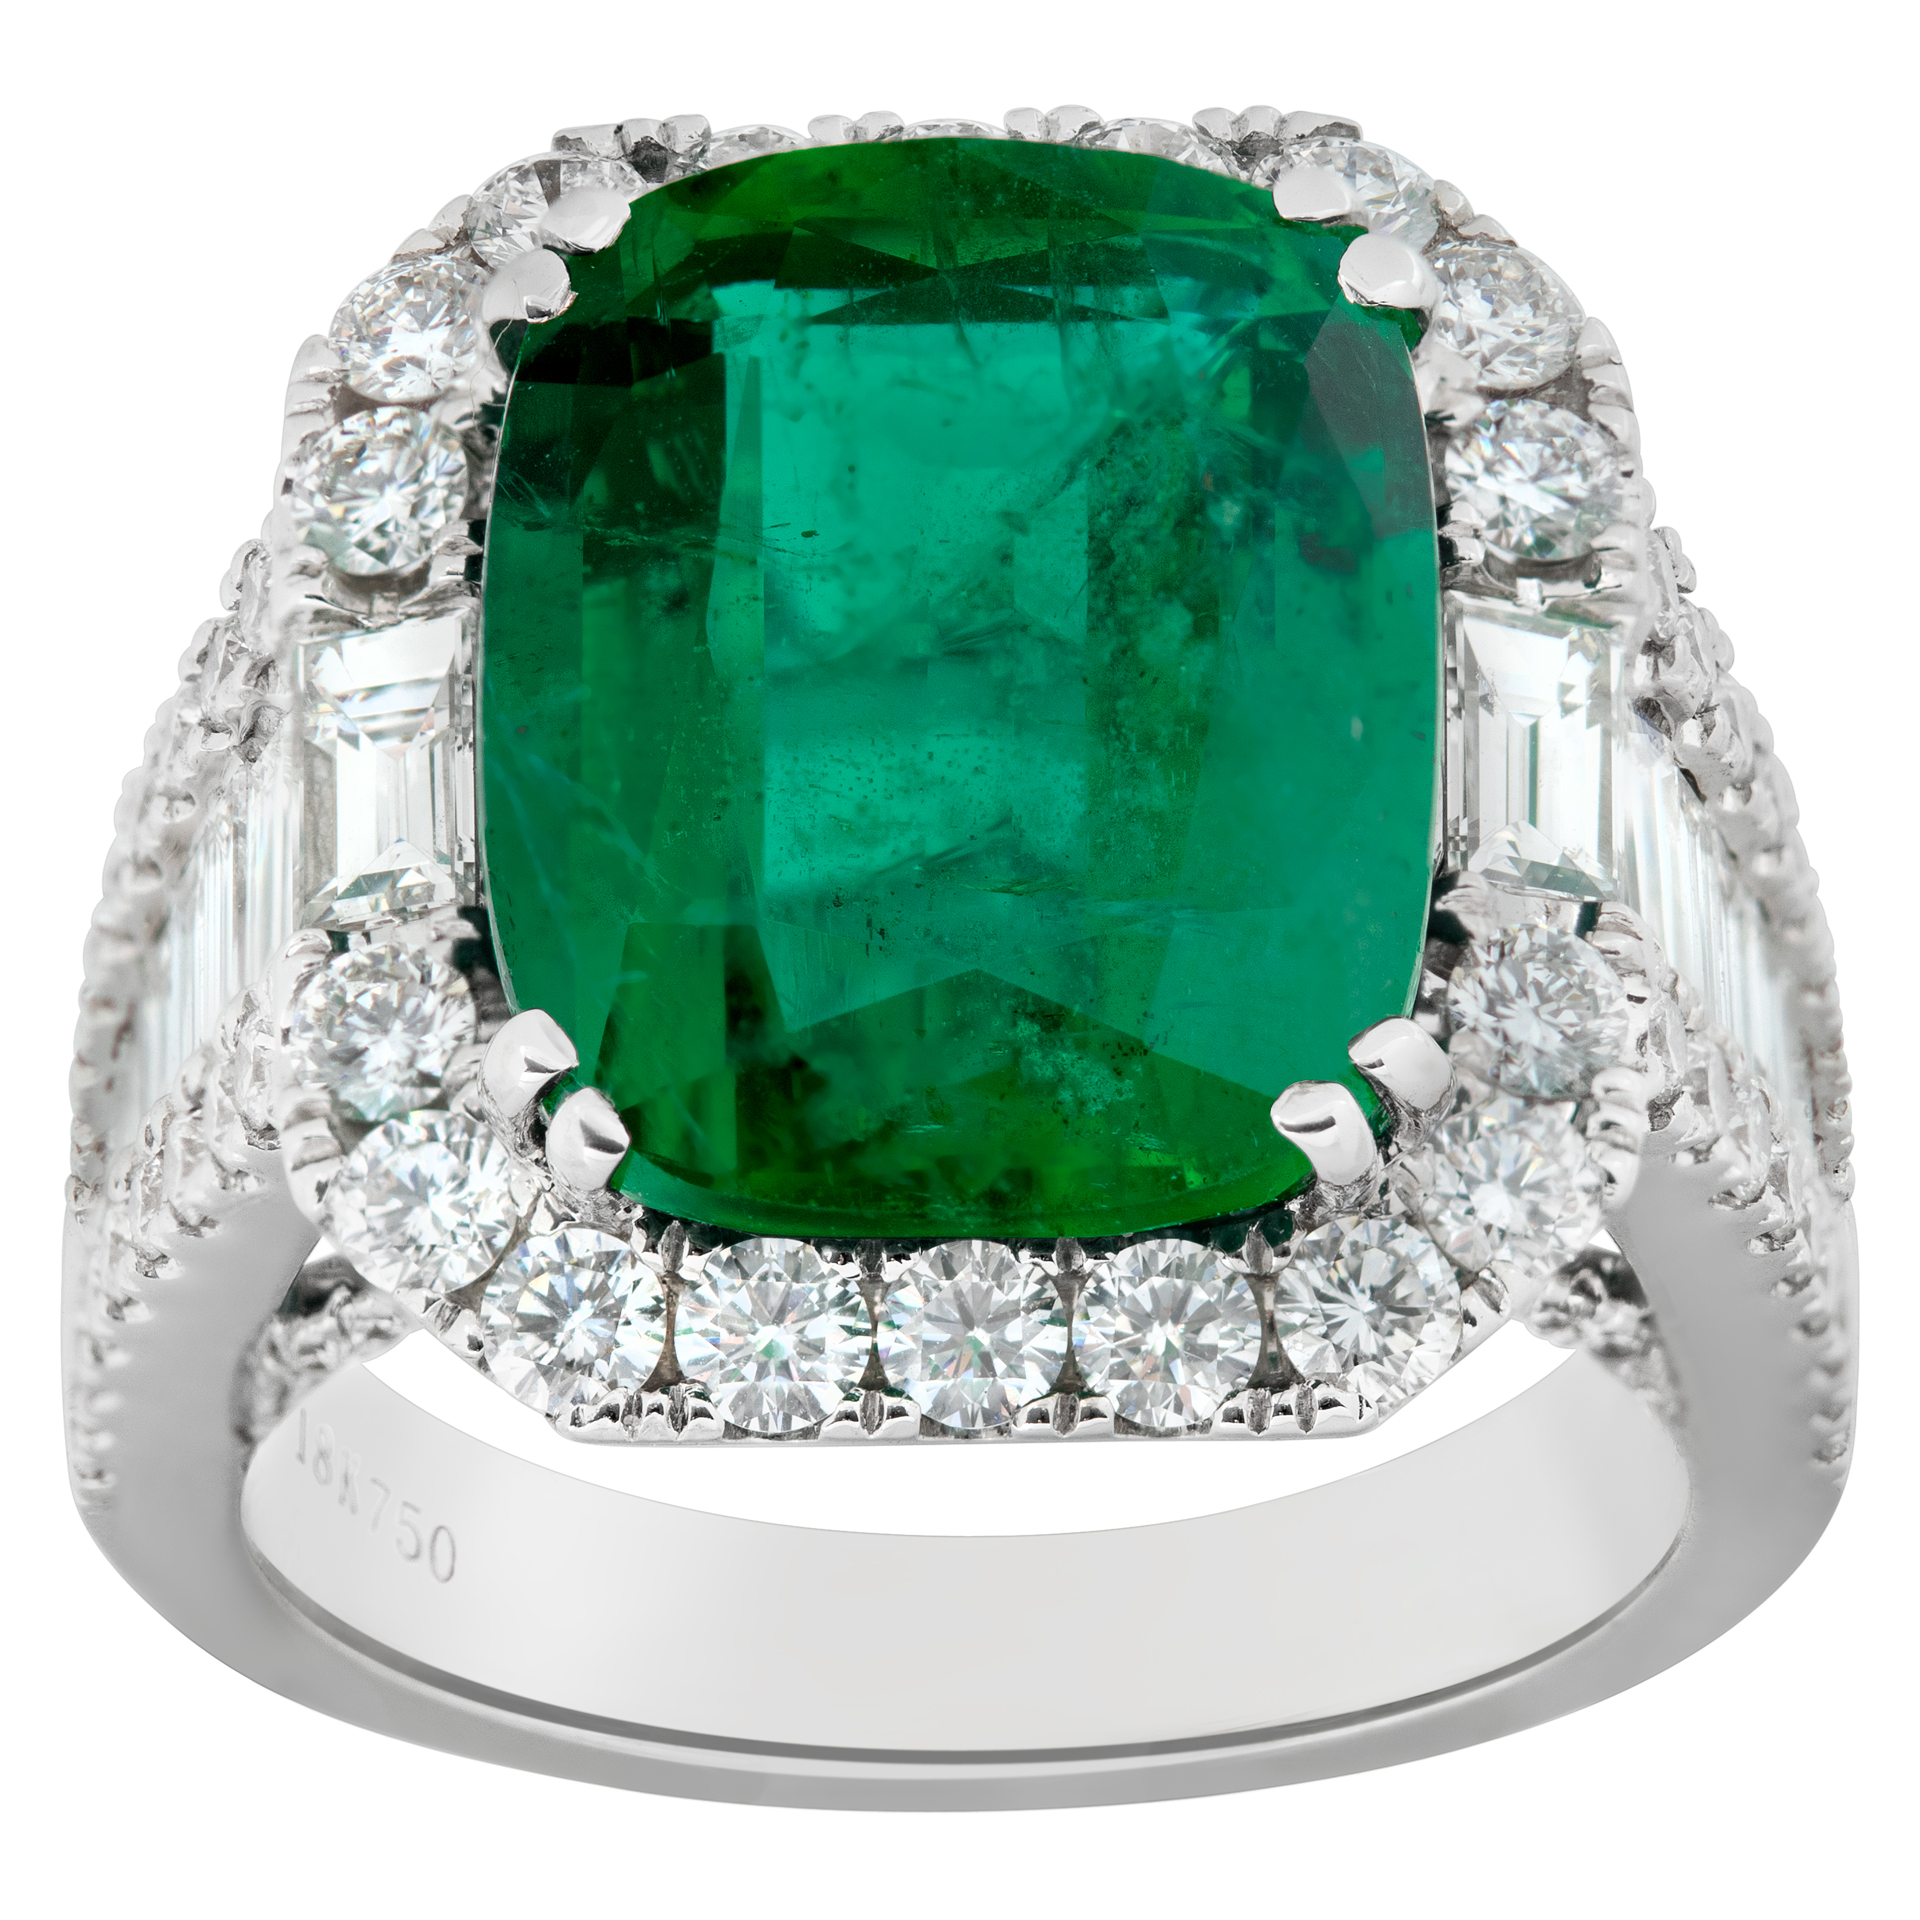 Emerald ring with diamonds in 18k white gold.